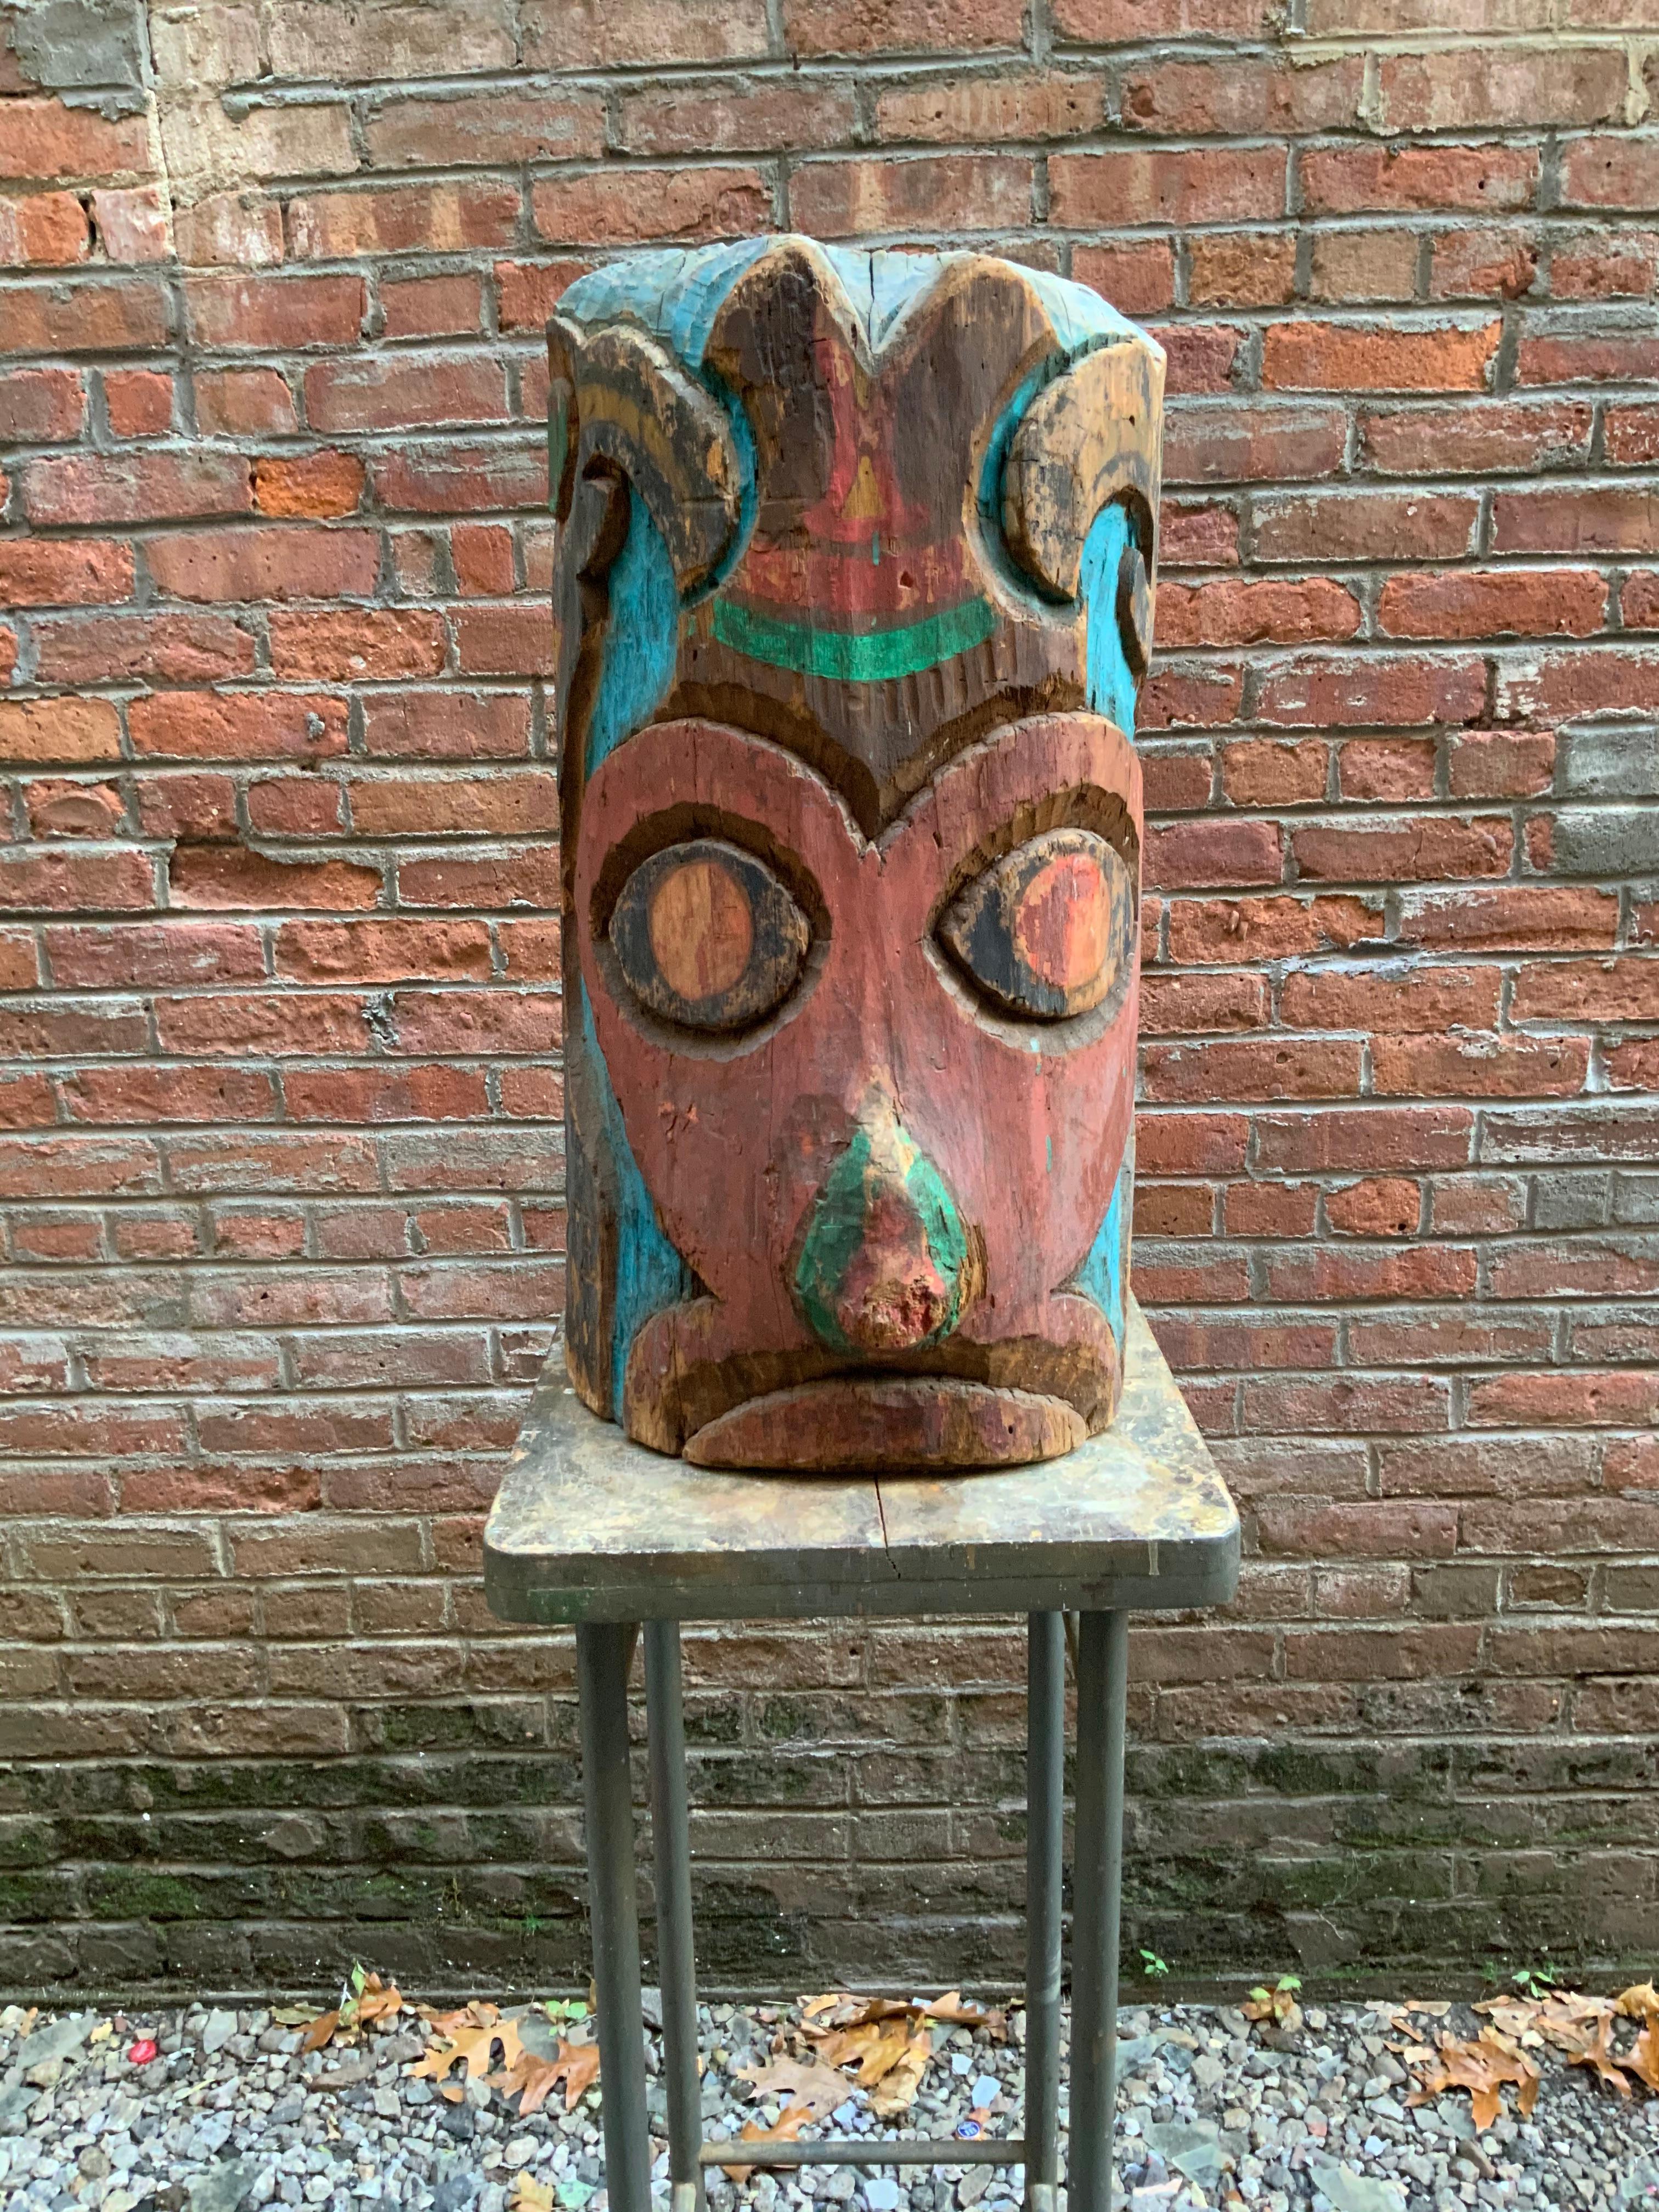 Initialled and dated, CF 1937, carved and painted Pacific Northwest Native American TOTEM. The carved decoration is indicative of the style and manner of TOTEM carvers in Washington State or British Colombia. Carved from a solid piece of wood